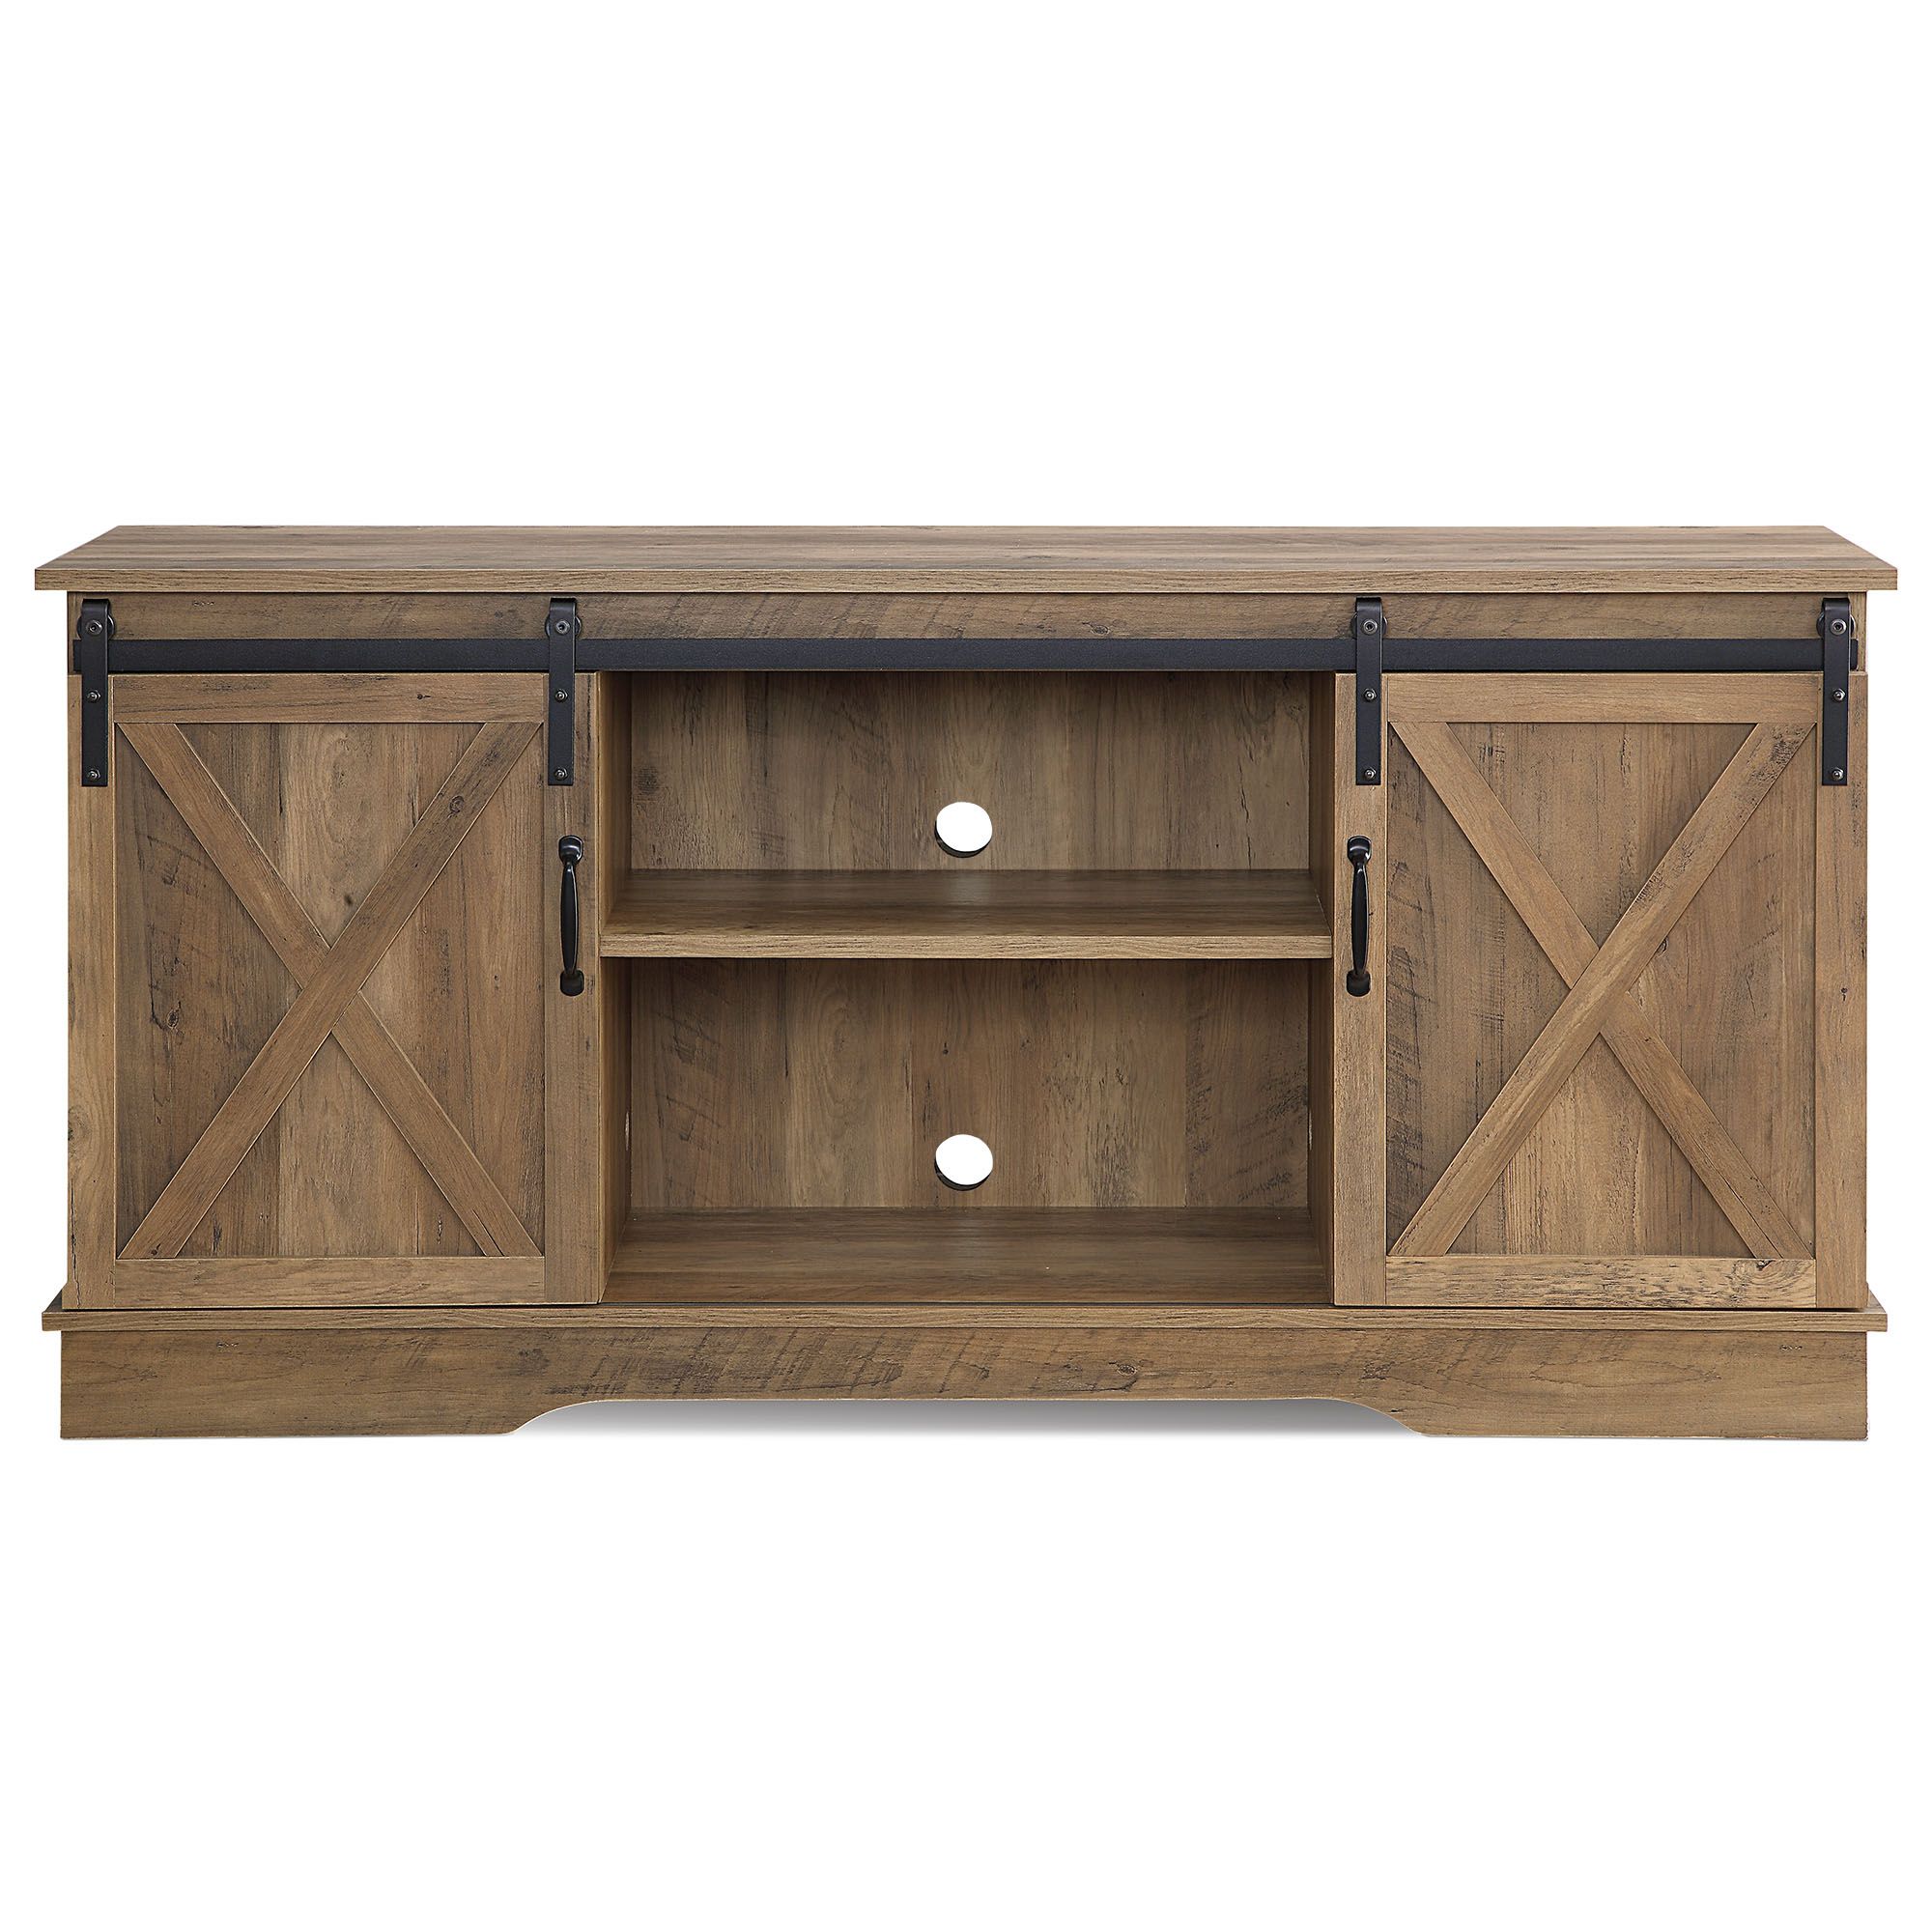 58"farmhouse Tv Stand W/sliding Door Console Table For Tvs Throughout Robinson Rustic Farmhouse Sliding Barn Door Corner Tv Stands (View 1 of 15)